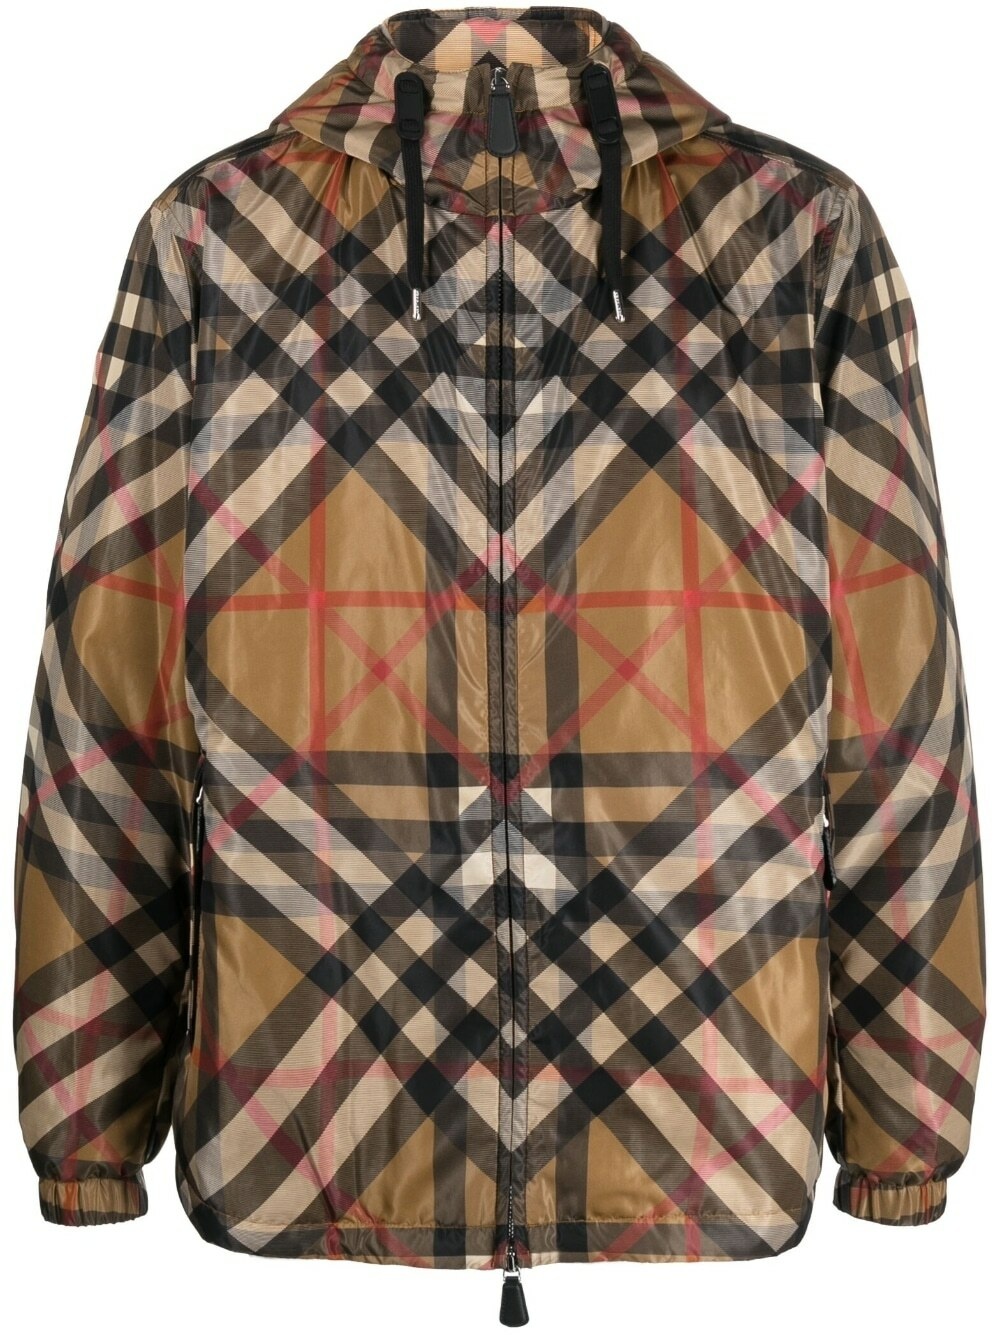 BURBERRY - Stanford Double Check Nylon Jacket Burberry